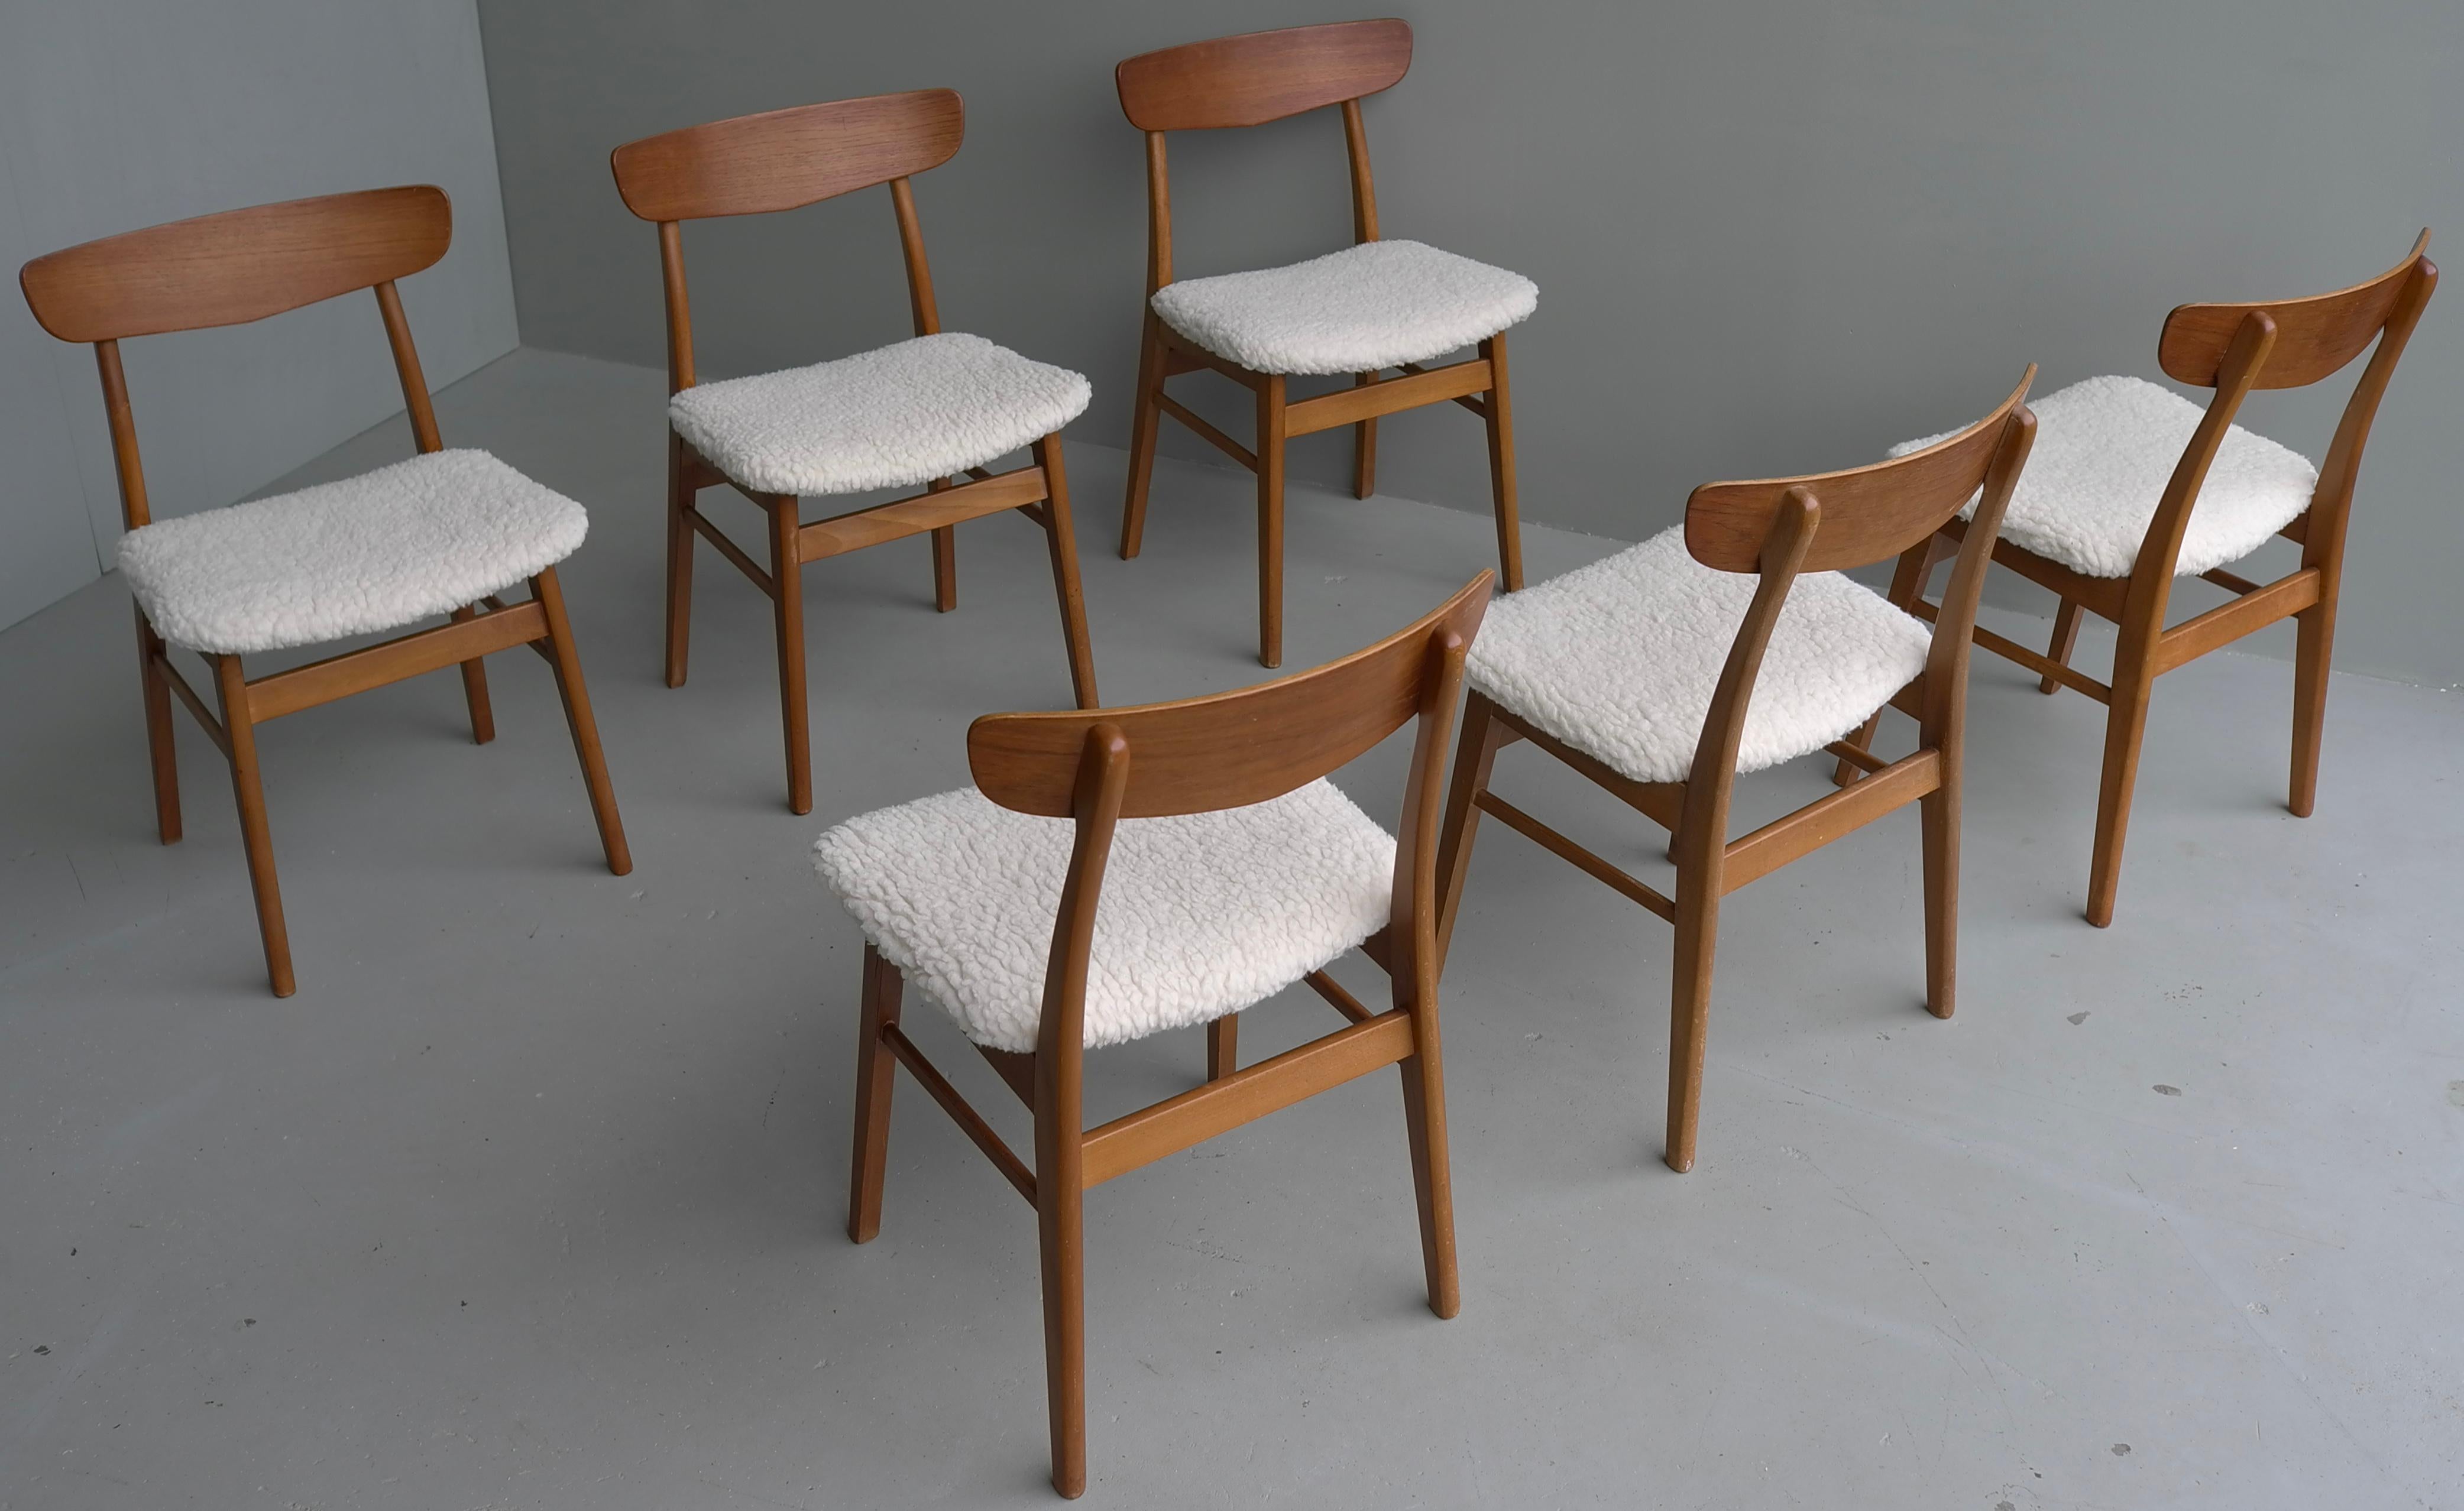 Mid-20th Century Six Teak Danish Heart Chairs with Seats in Pure Merino Wool, by Farstrup Møbler